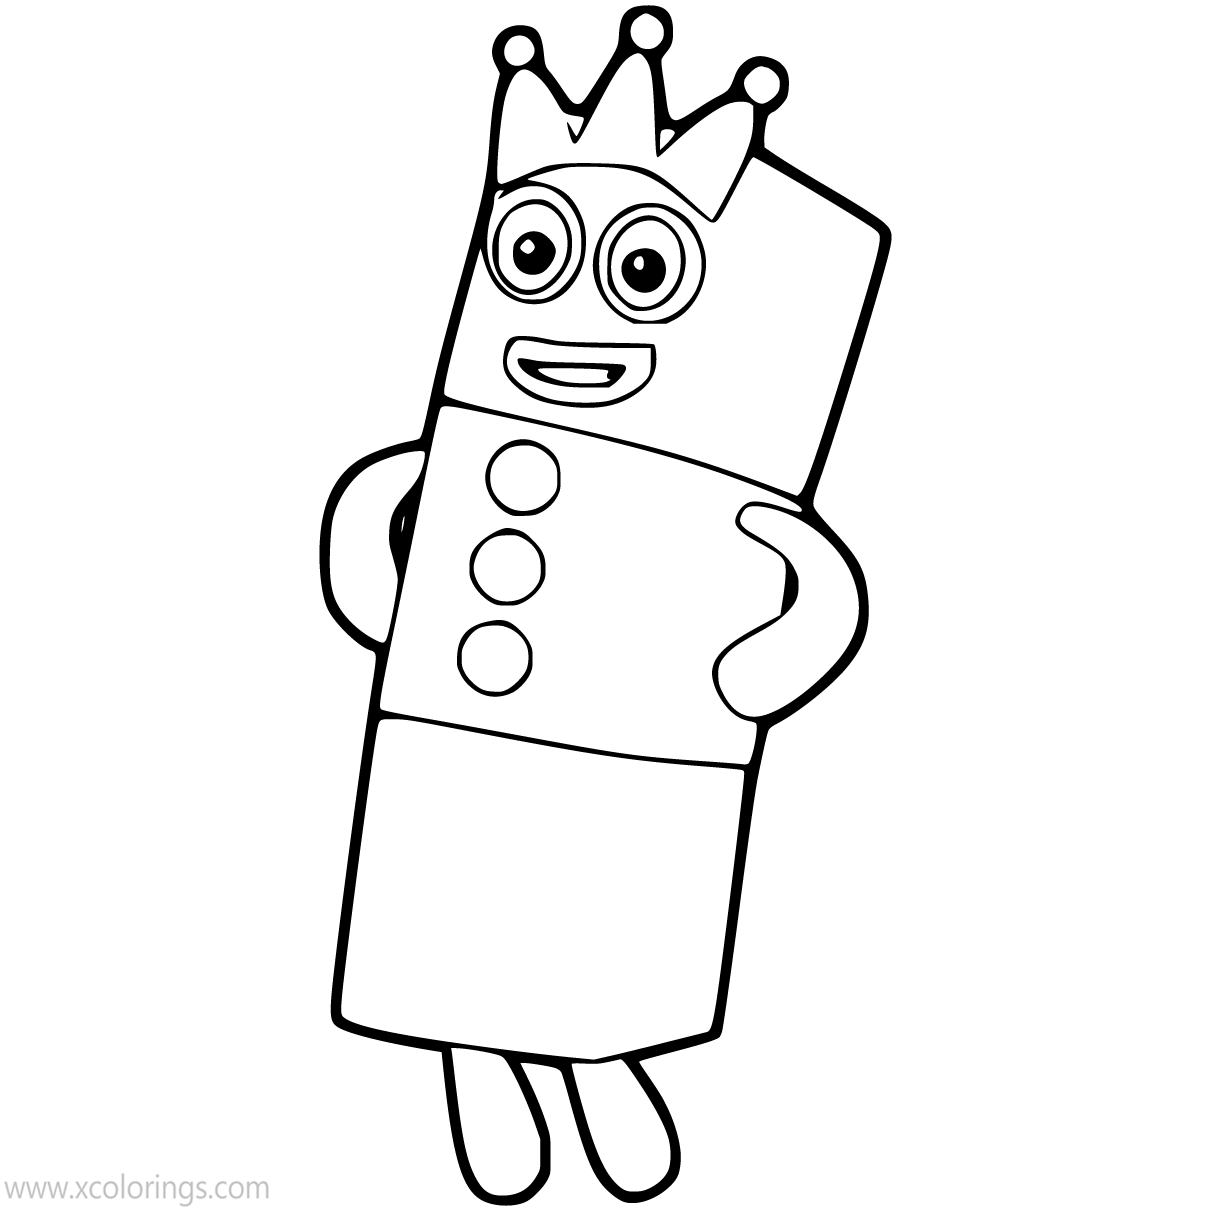 Numberblocks Coloring Pages 1 2 3 Xcoloringscom Images